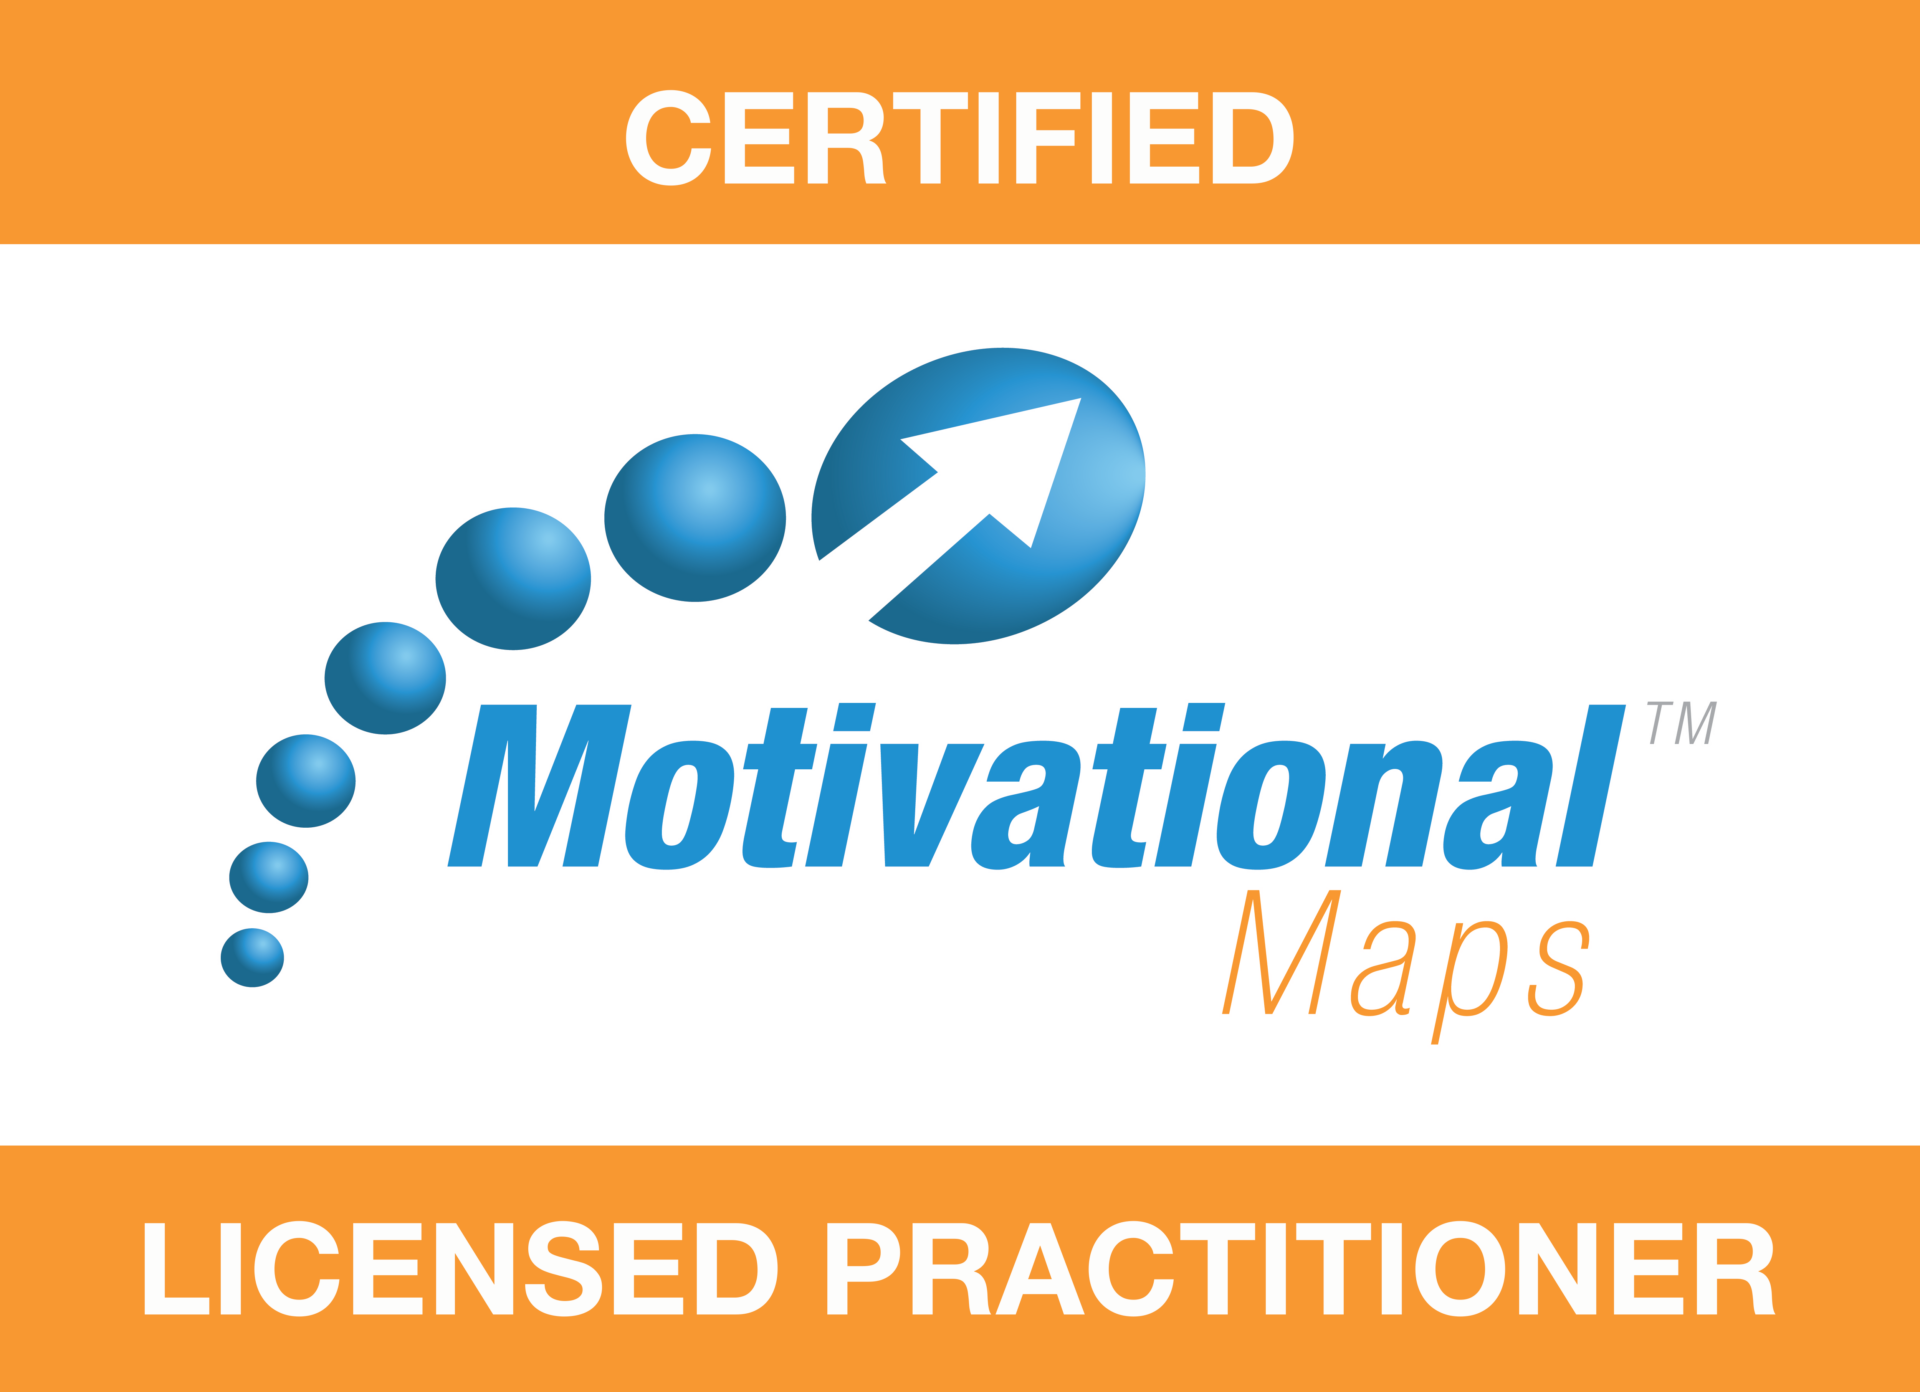 Certified in Motivational Maps